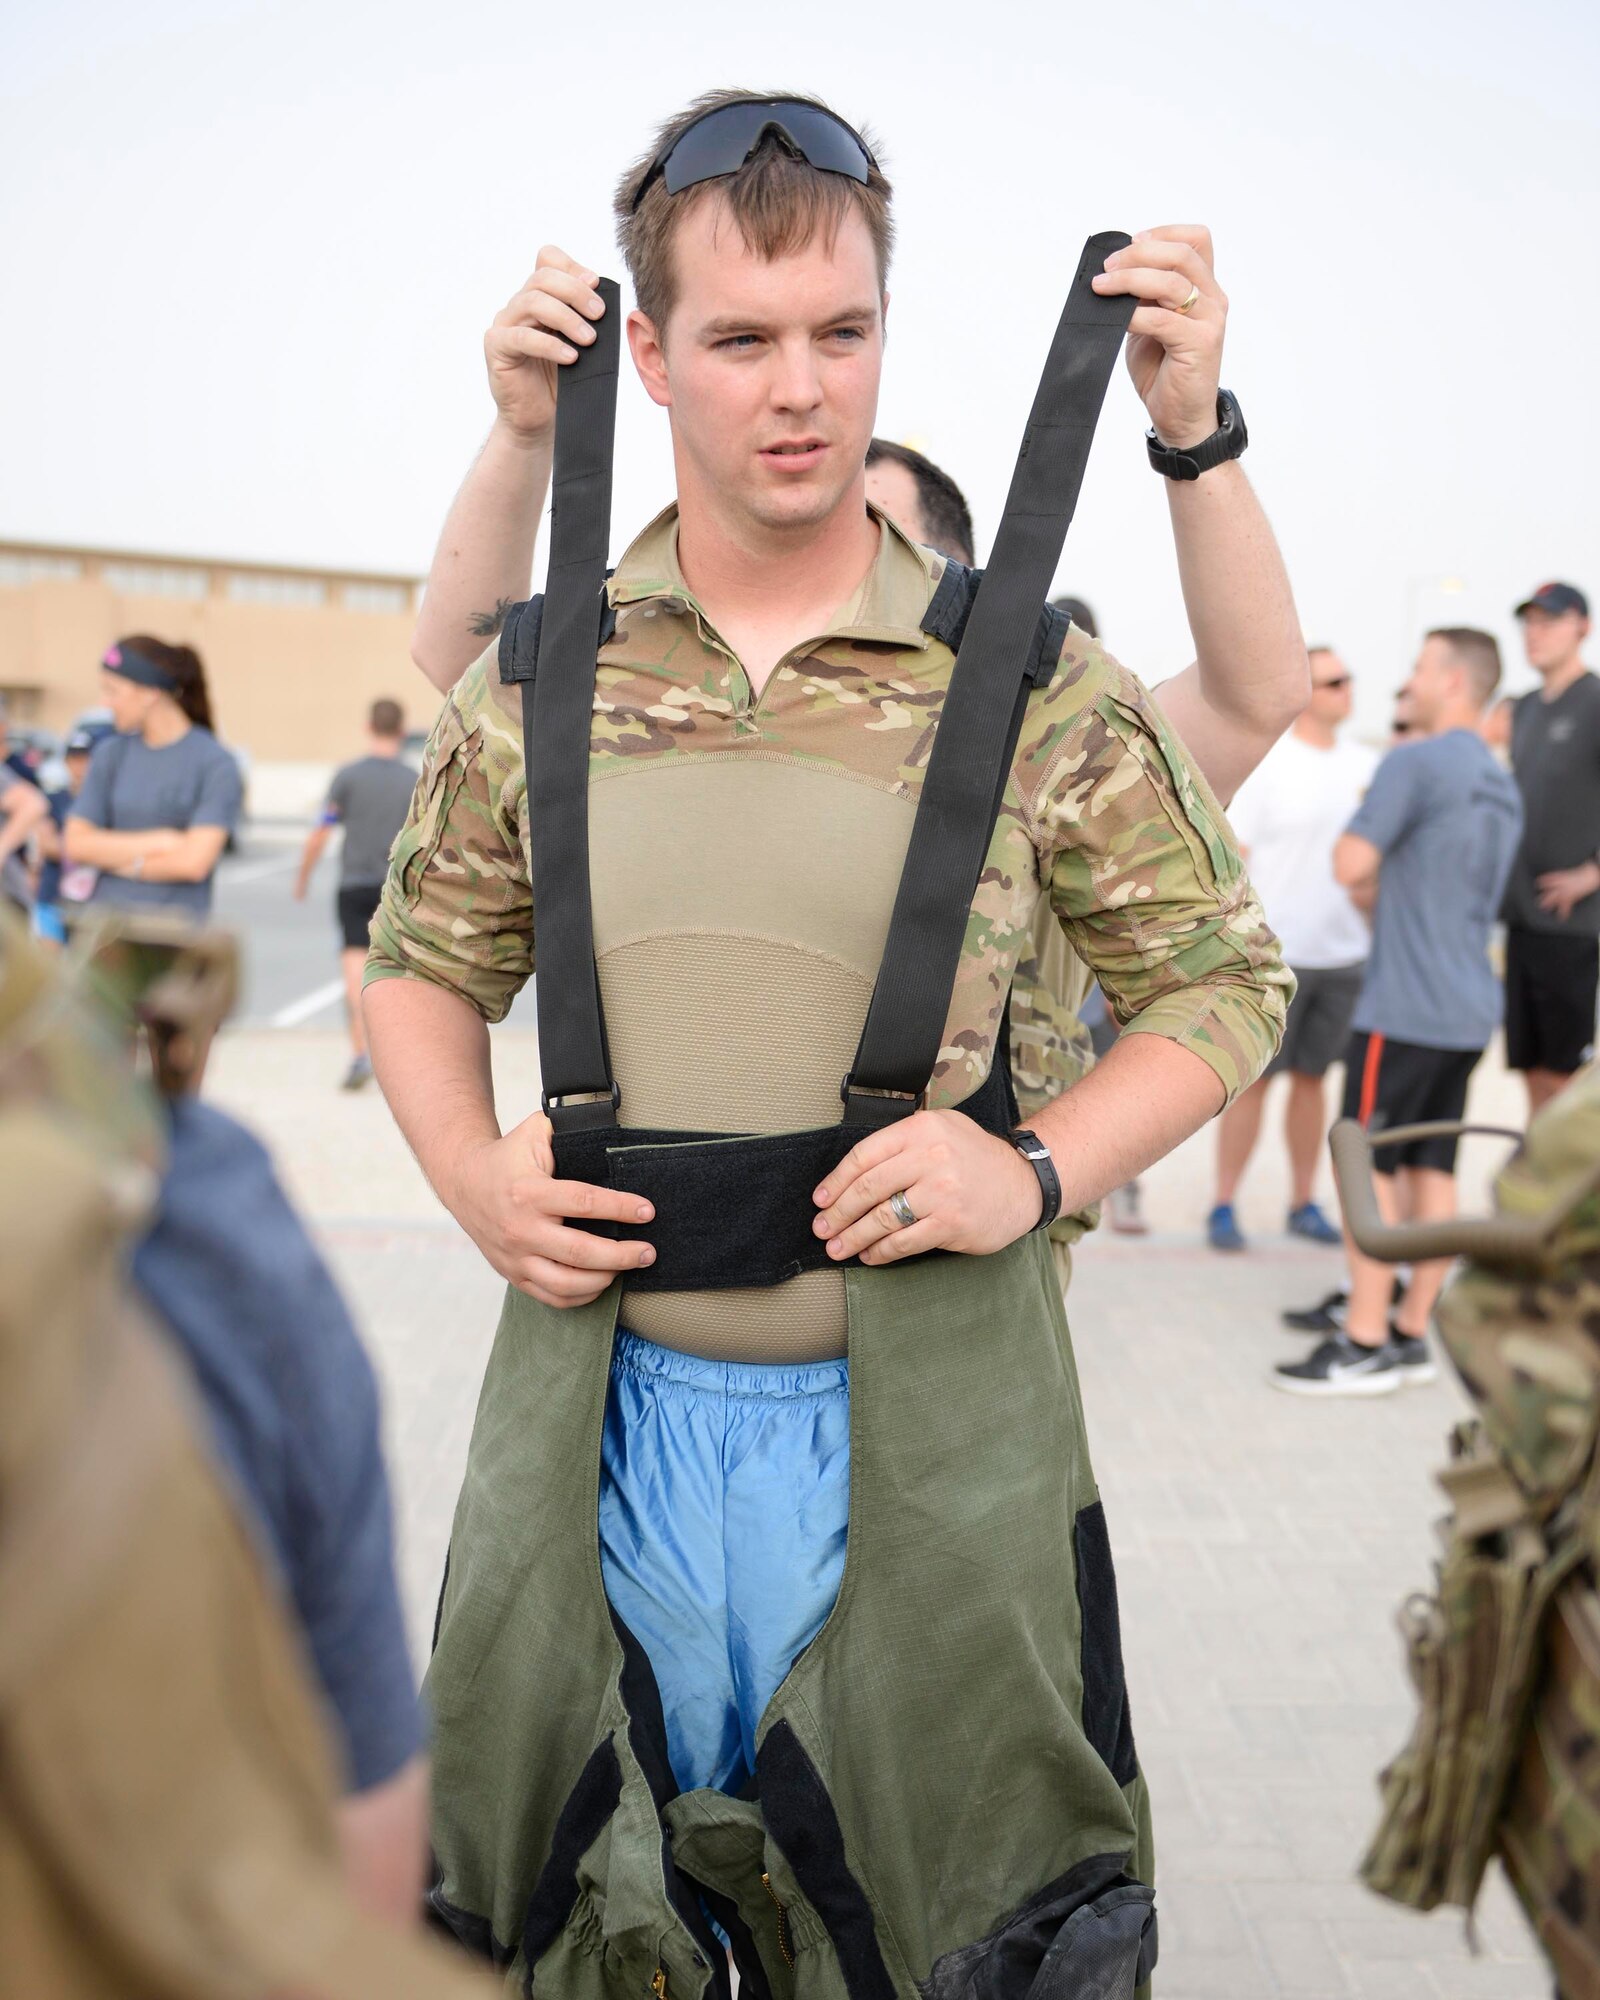 U.S. Air Force Staff Sgt. Brent Points, explosive ordinance disposal technician, assigned to the 379th Civil Engineering Squadron, gets help donning the bomb suit he will wear during the annual EOD 5K Memorial Run at Al Udeid Air Base, Qatar, June 3, 2017. Points joined fellow EOD members along with service members from across the base to take part in the EOD 5K Memorial Run in memory of the EOD men and women killed in action during combat operations. (U.S. Air Force photo by Tech. Sgt. Bradly A. Schneider/Released)